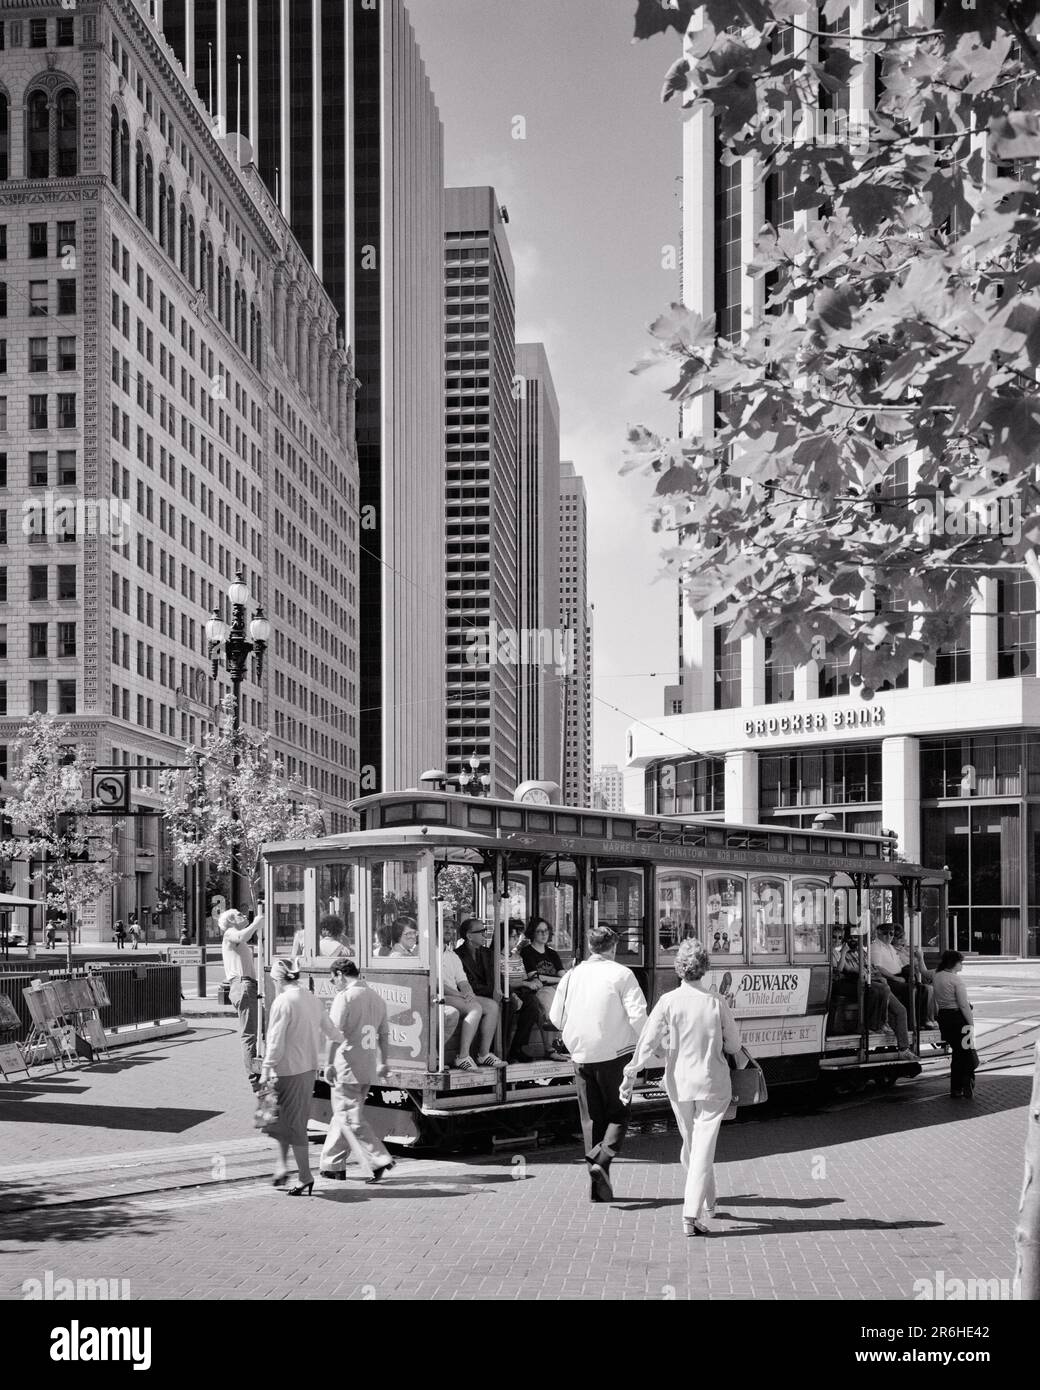 1970s 1980s CABLE CAR TURNAROUND ON MARKET STREET AND POWELL PASSENGERS GETTING ON AND OFF SAN FRANCISCO CA USA - r25638 KRU001 HARS PASSENGERS UNITED STATES COPY SPACE FULL-LENGTH LADIES ICON PERSONS UNITED STATES OF AMERICA MALES BUILDINGS SYMBOLS TRANSPORTATION B&W FRANCISCO NORTH AMERICA NORTH AMERICAN TIME OFF HIGH ANGLE PROPERTY TRIP AND GETAWAY CA HOLIDAYS REAL ESTATE CONCEPT WEST COAST CONCEPTUAL STRUCTURES CABLE CAR EDIFICE SYMBOLIC CONCEPTS POWELL TRANSIT USDA VACATIONS BLACK AND WHITE CABLE CAUCASIAN ETHNICITY ICONIC OLD FASHIONED PUBLIC TRANSPORTATION REPRESENTATION Stock Photo